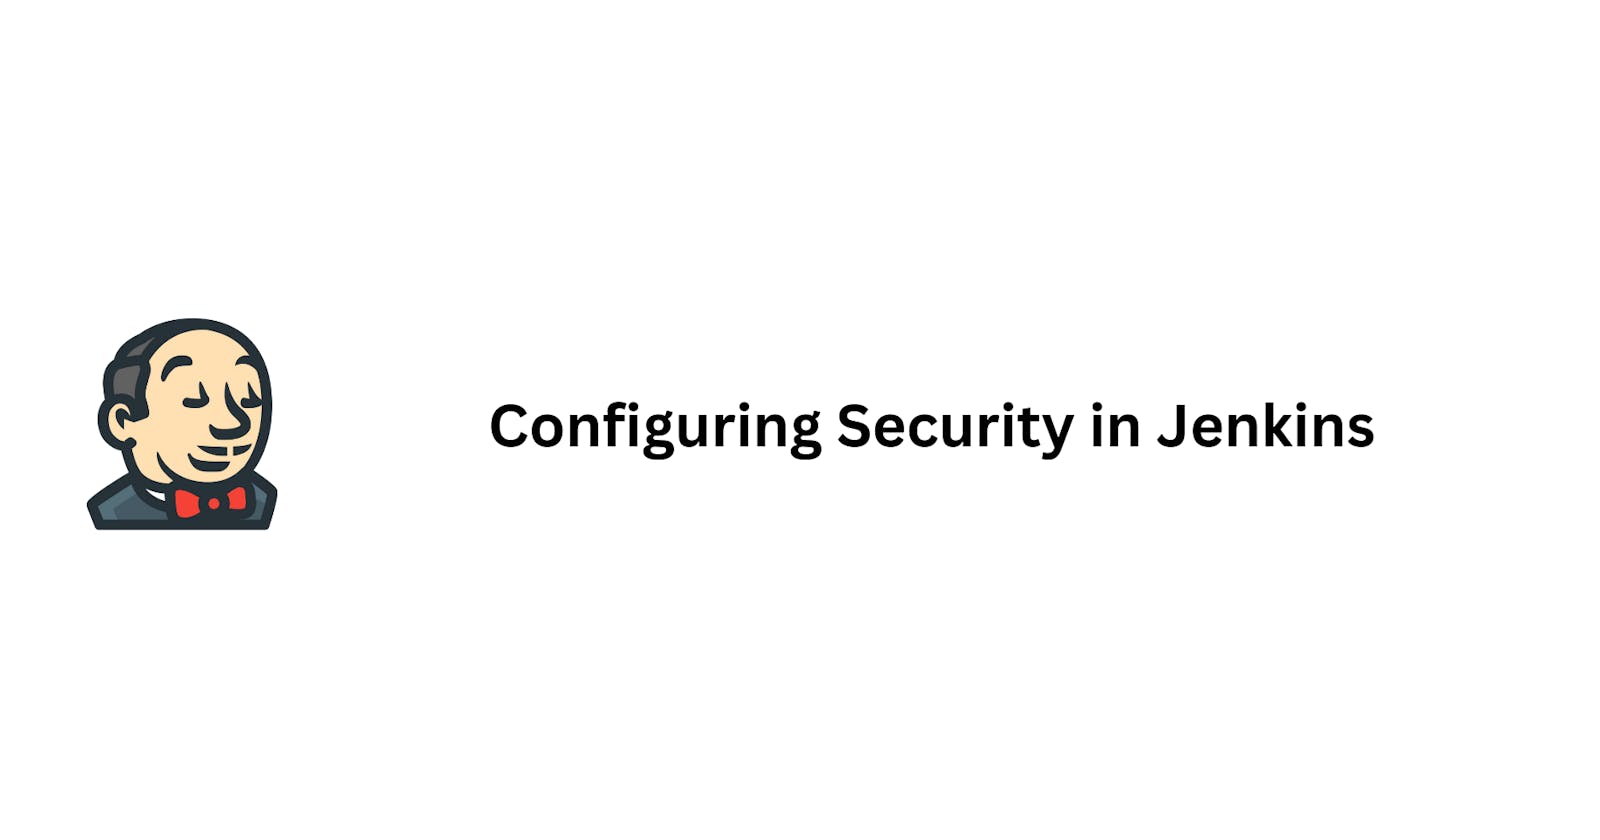 Configuring Security in Jenkins: Enhancing Access Control